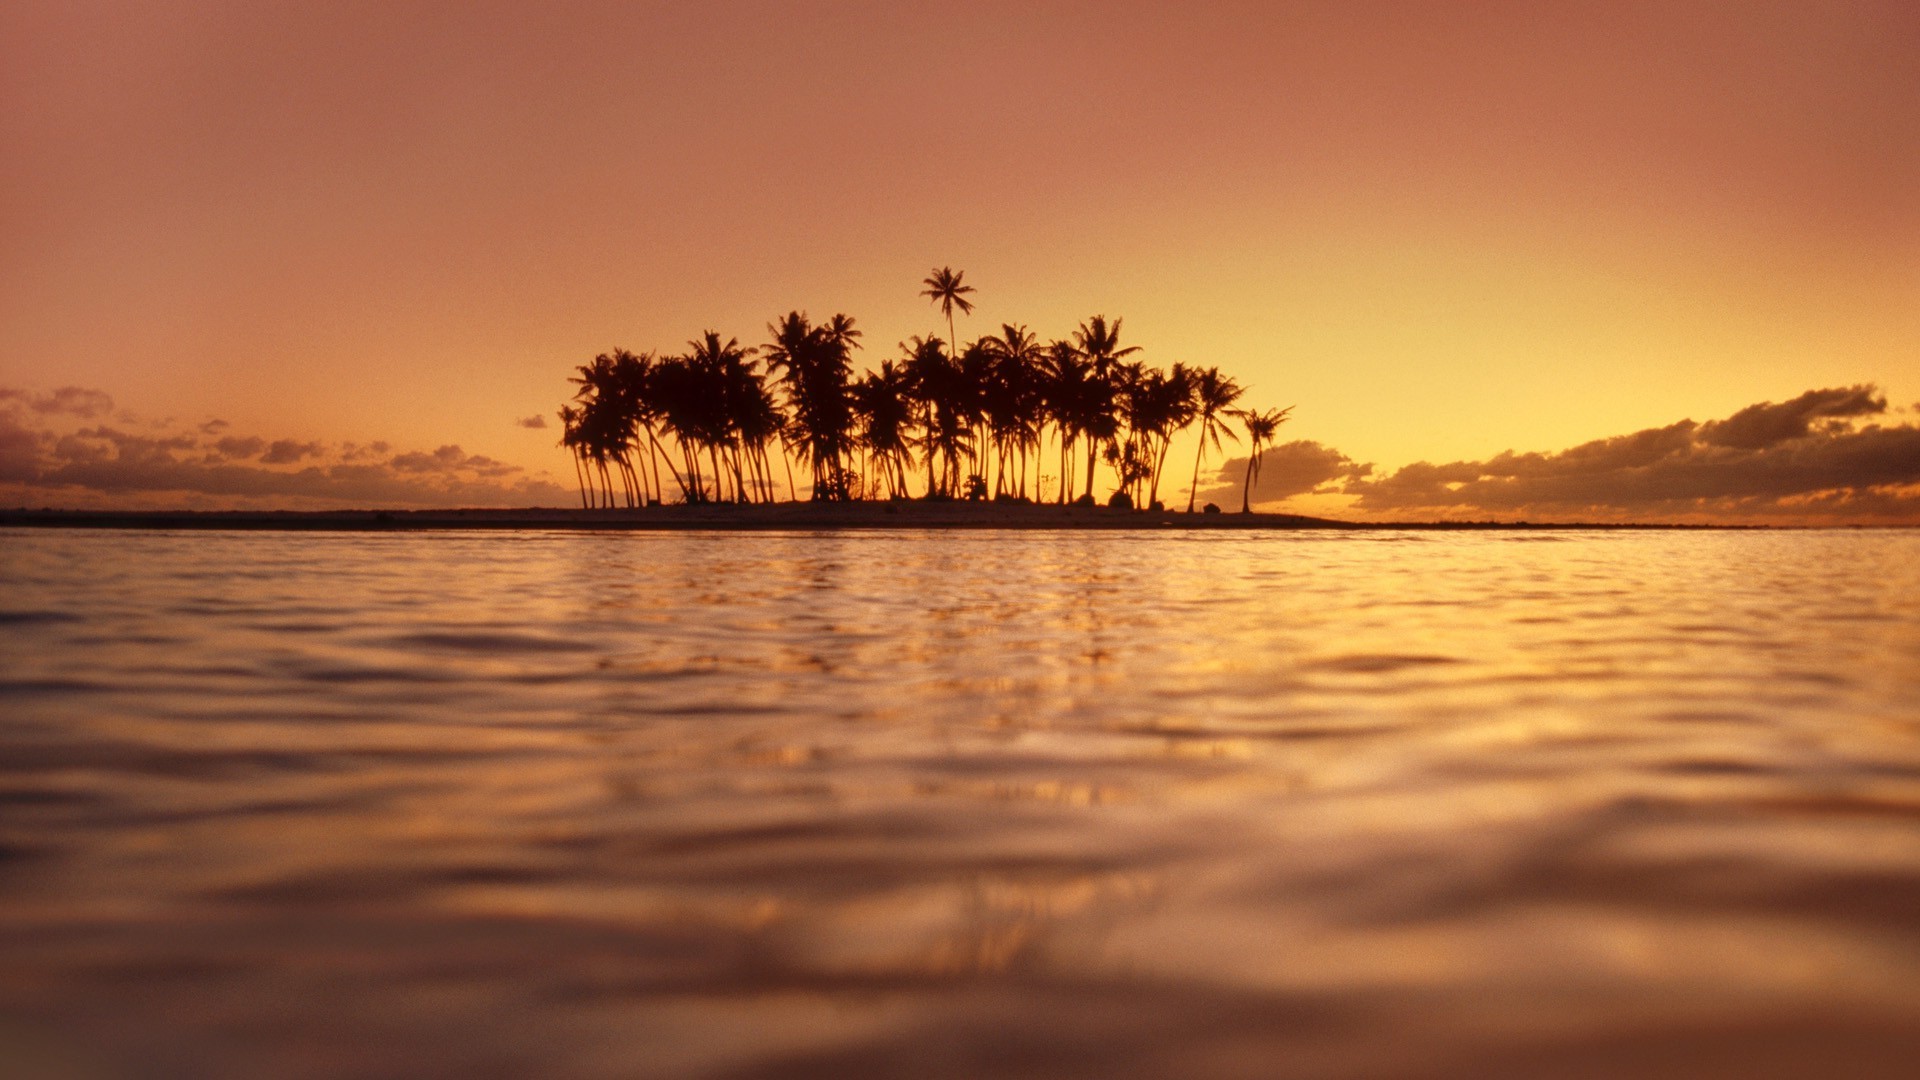 photography, Nature, Landscape, Water, Sea, Island, Palm Trees, Sunset Wallpaper